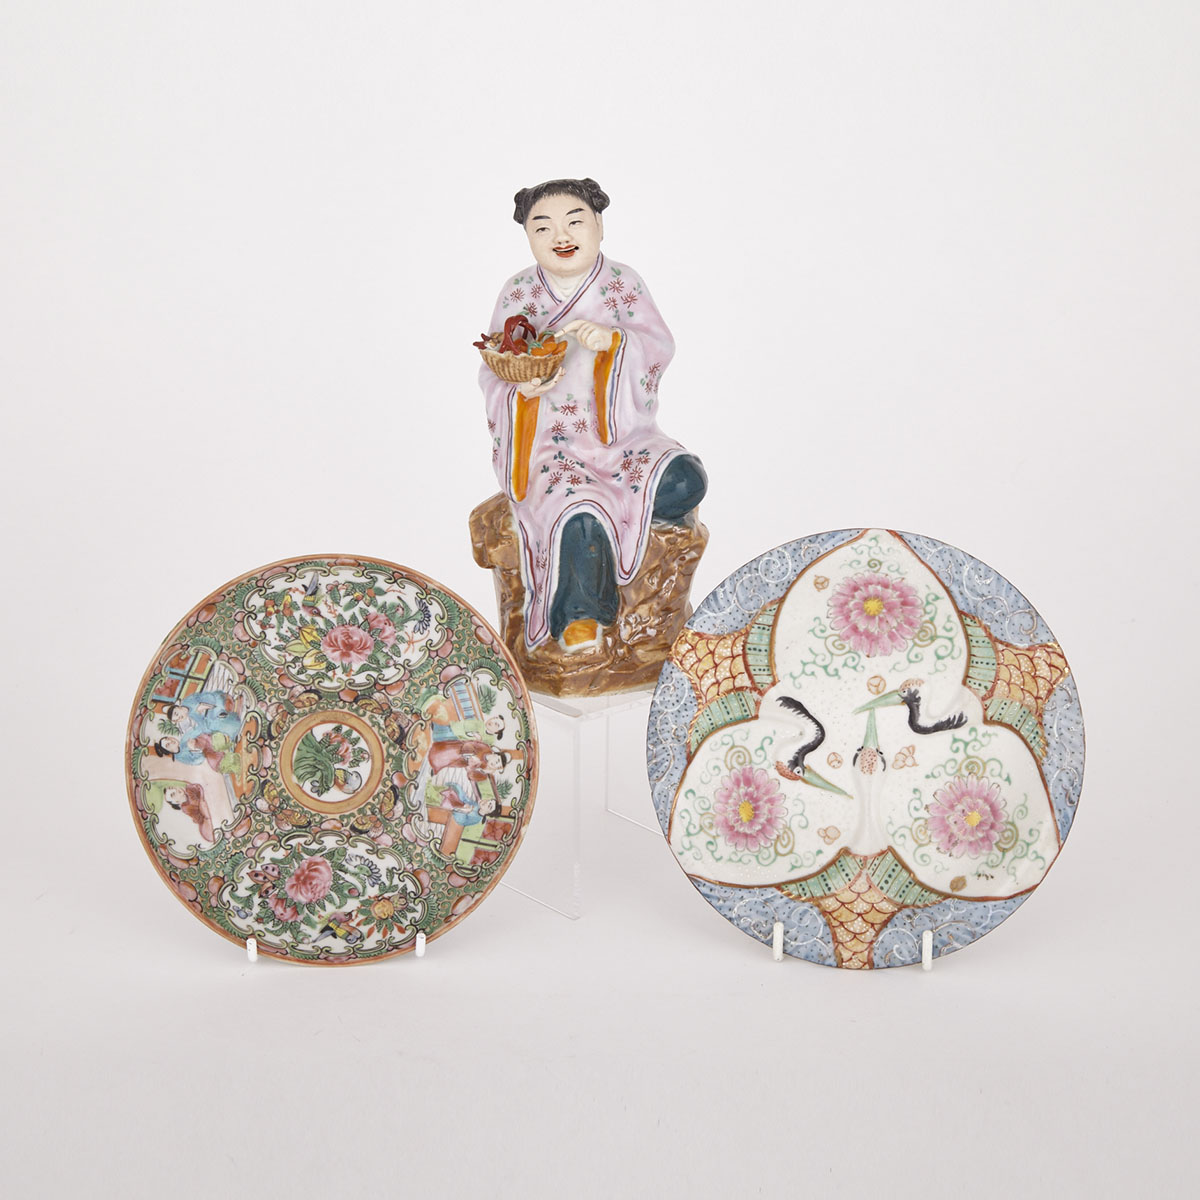 Three Pieces of Porcelain, Early 20th Century